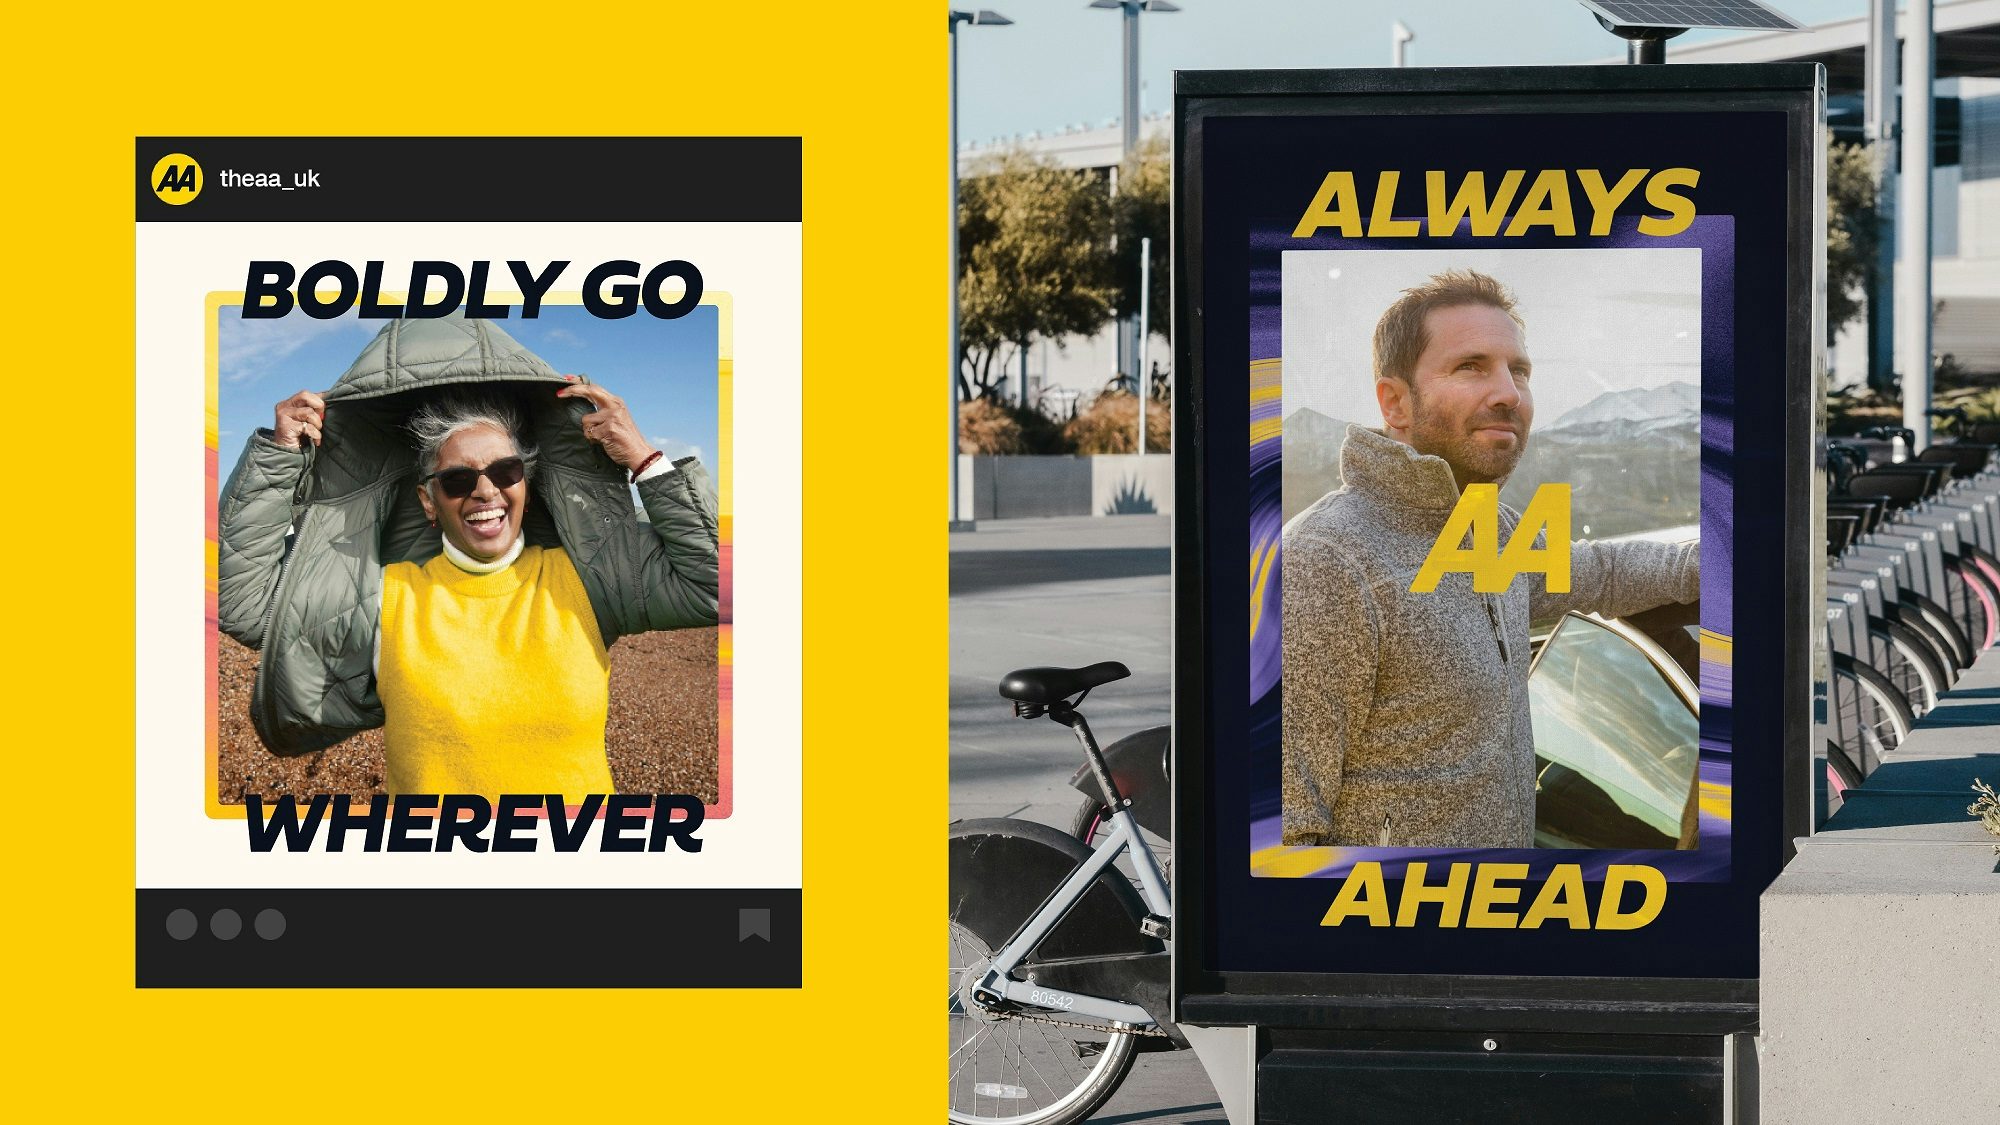 Composite image showing an AA social post headlined 'boldly go wherever' with a photo of a smiling person wearing sunglasses and a coat coat pulled over their head, and an outdoor poster on the right headlined 'always ahead' over the top of a photo of a person wearing a beige collared zip sweater